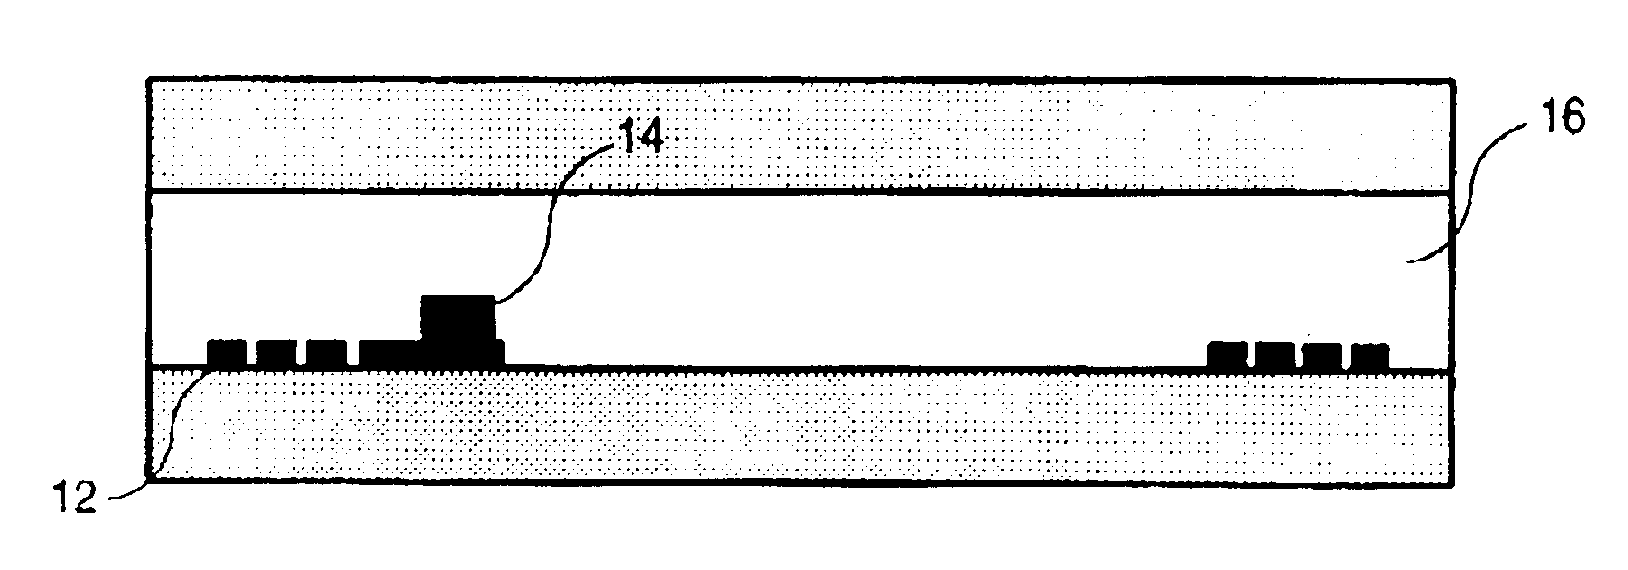 Method for producing a contactless chip card using transfer paper